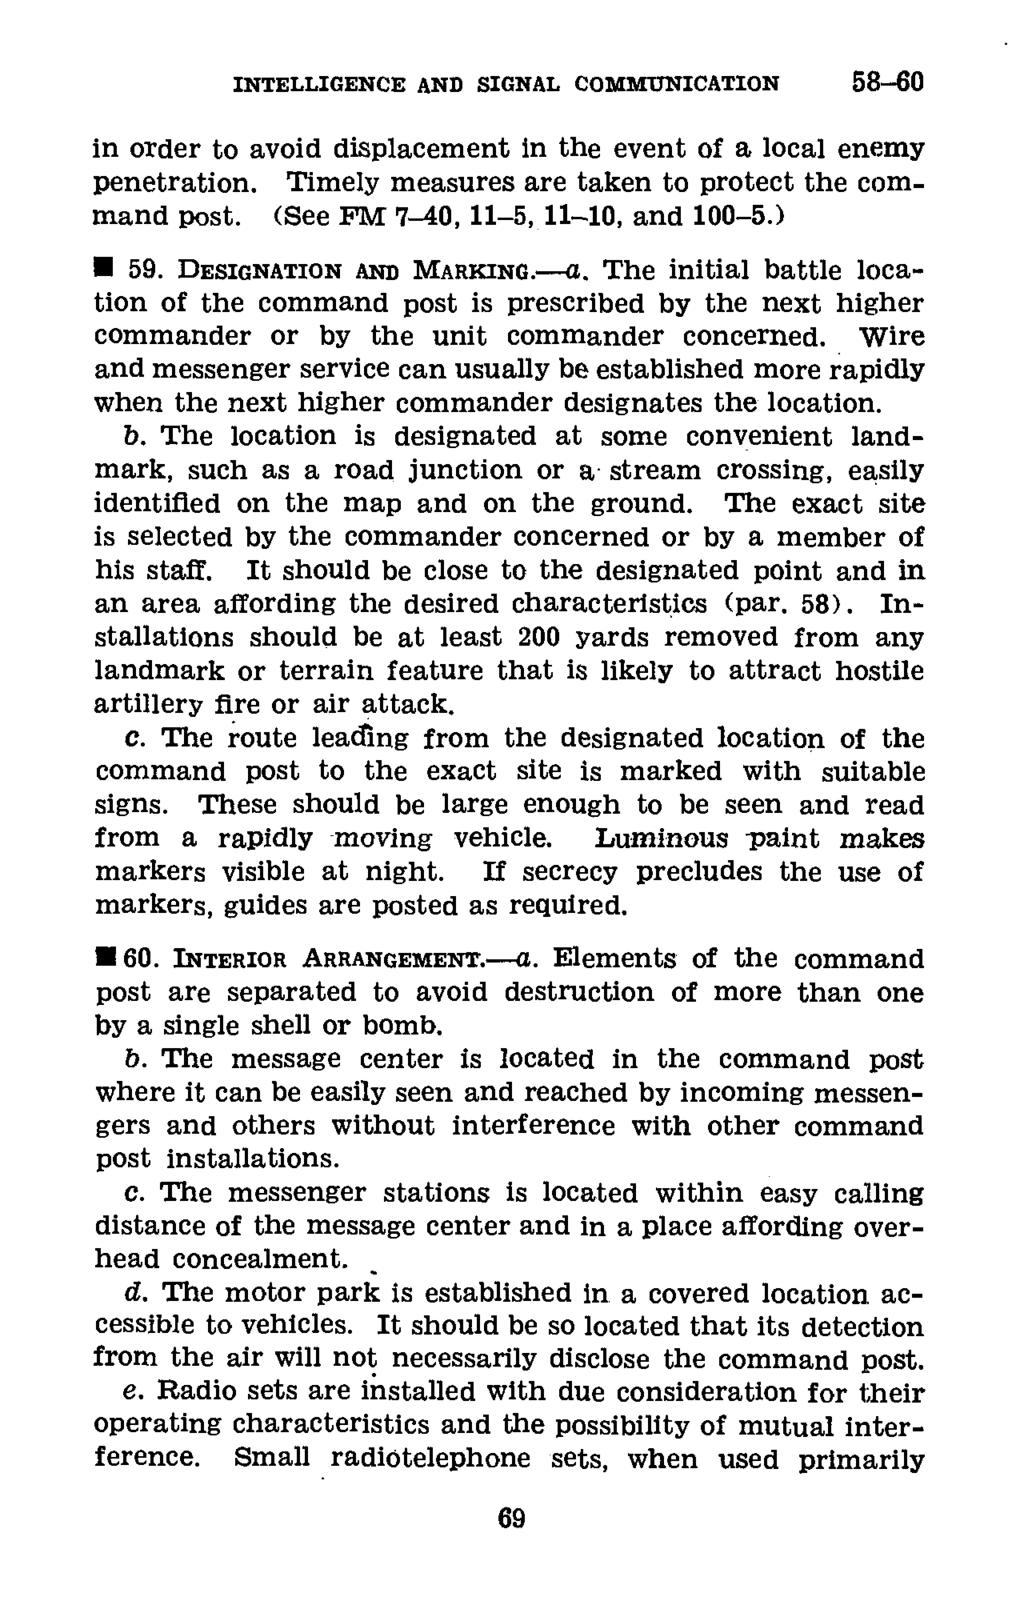 INTELLIGENCE AND SIGNAL COMMUNICATION 58-60 in order to avoid displacement in the event of a local enemy penetration. Timely measures are taken to protect the command post.